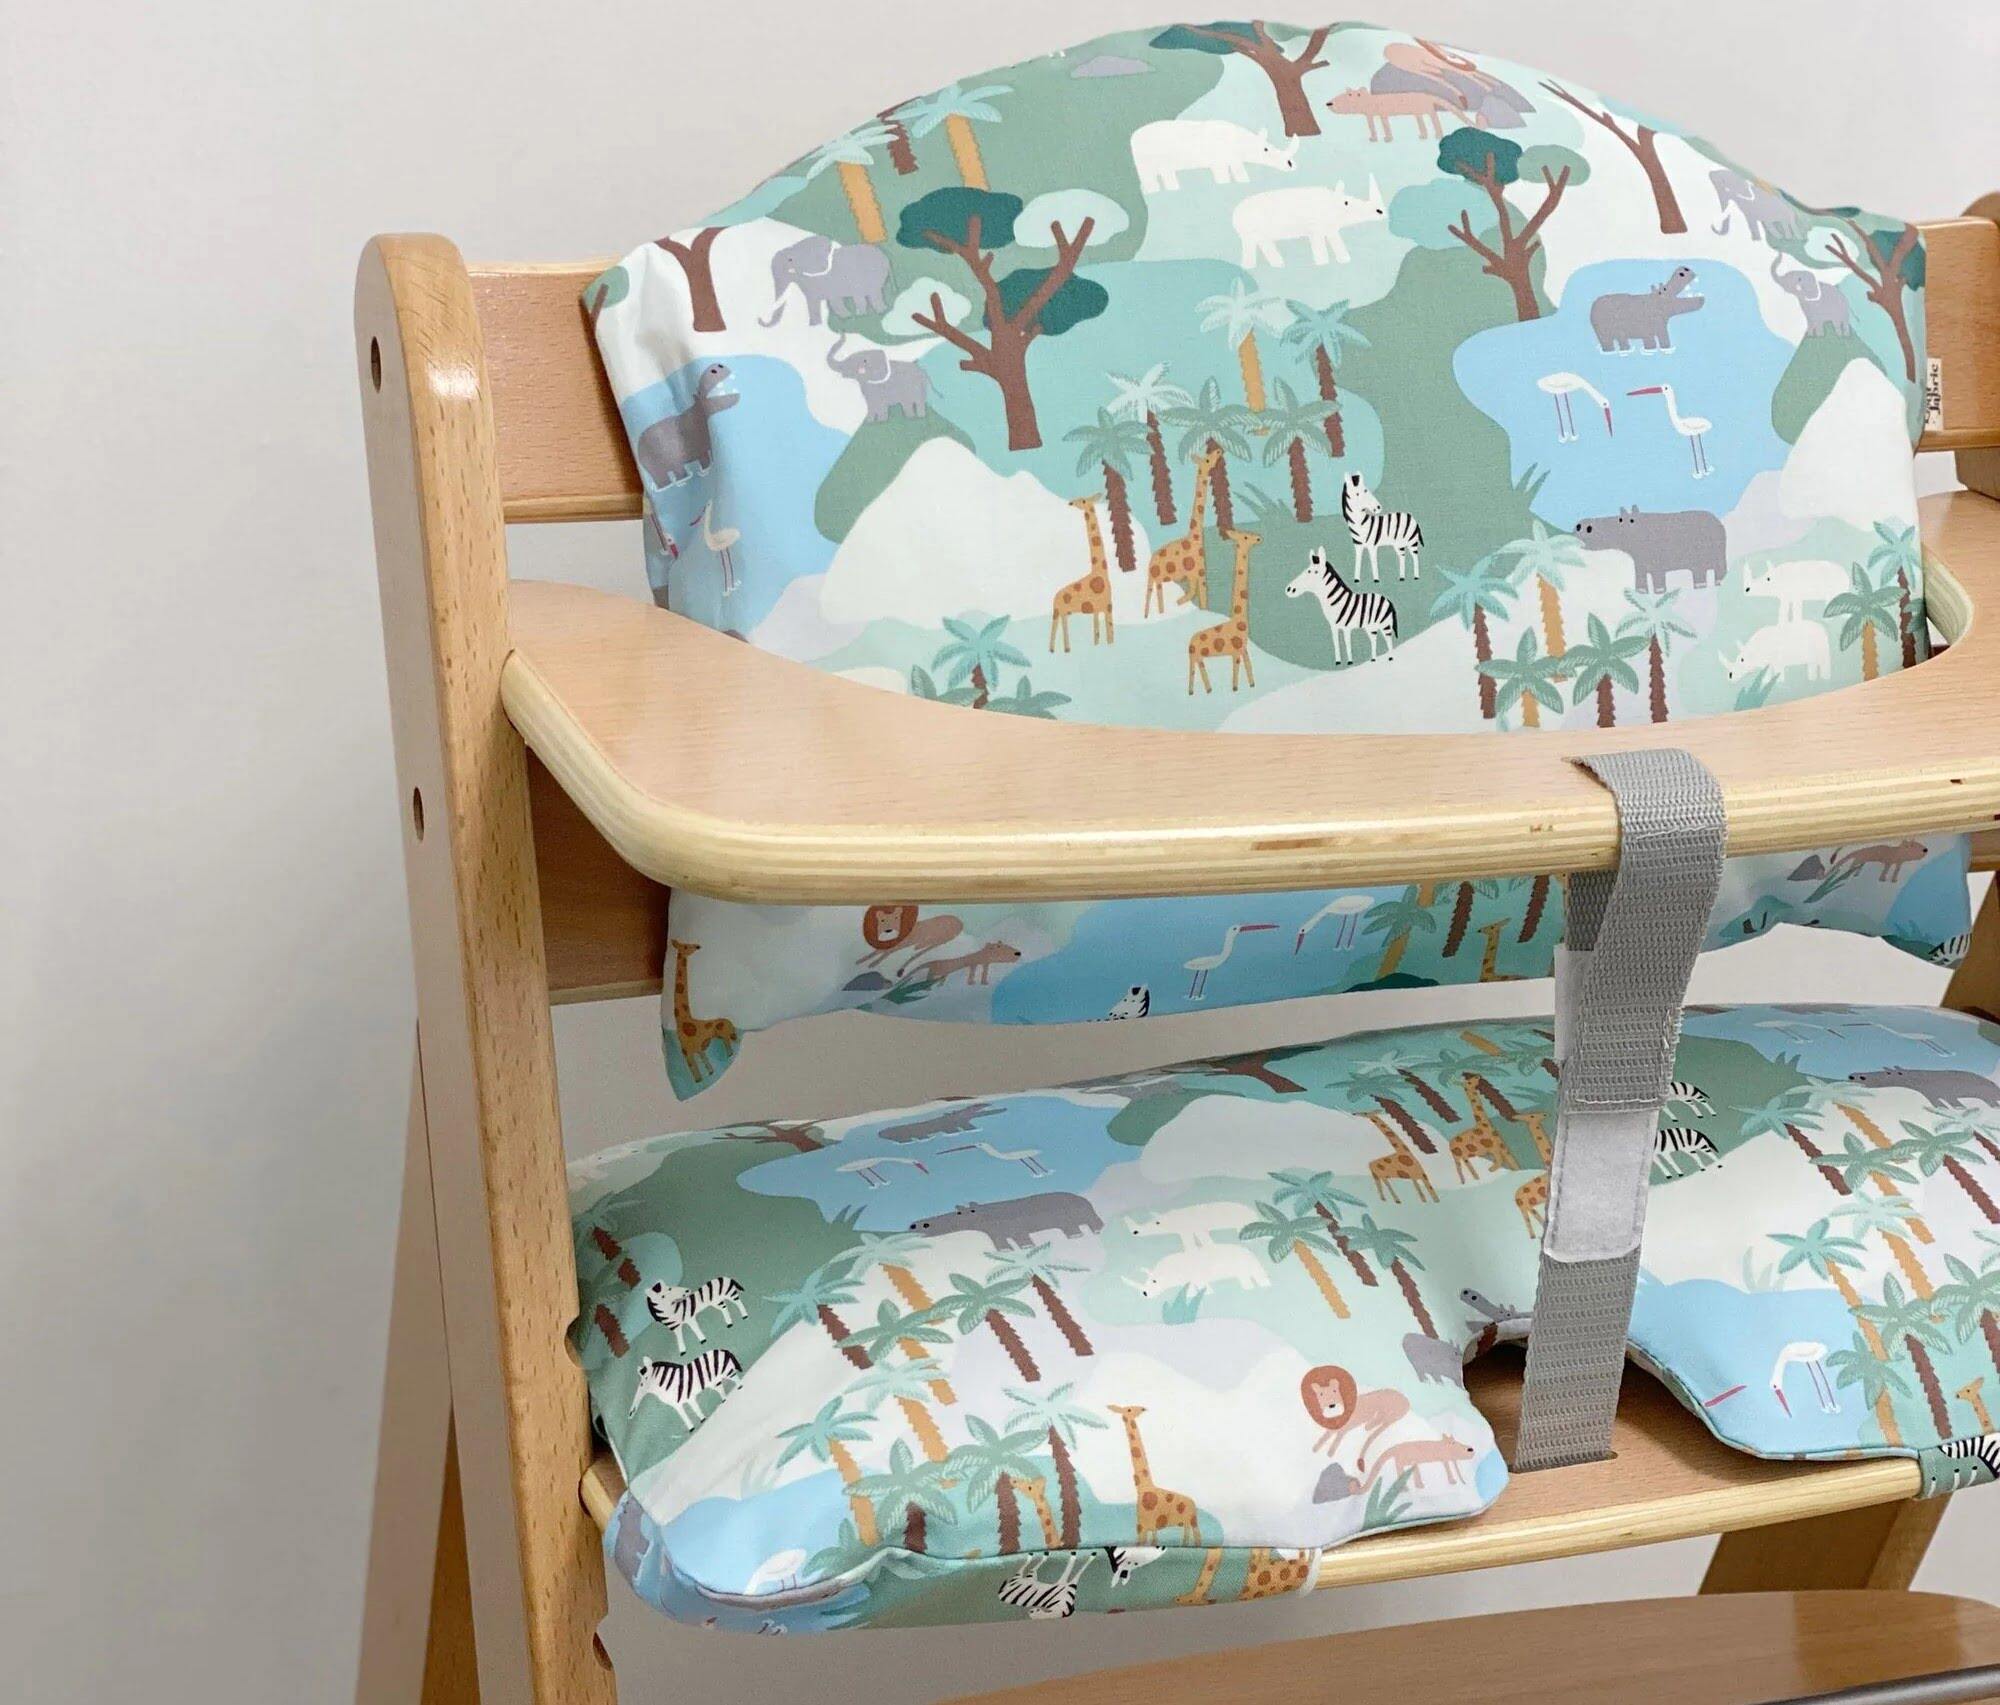 High Chair Cushion Review: Comfort and Durability for Your Baby